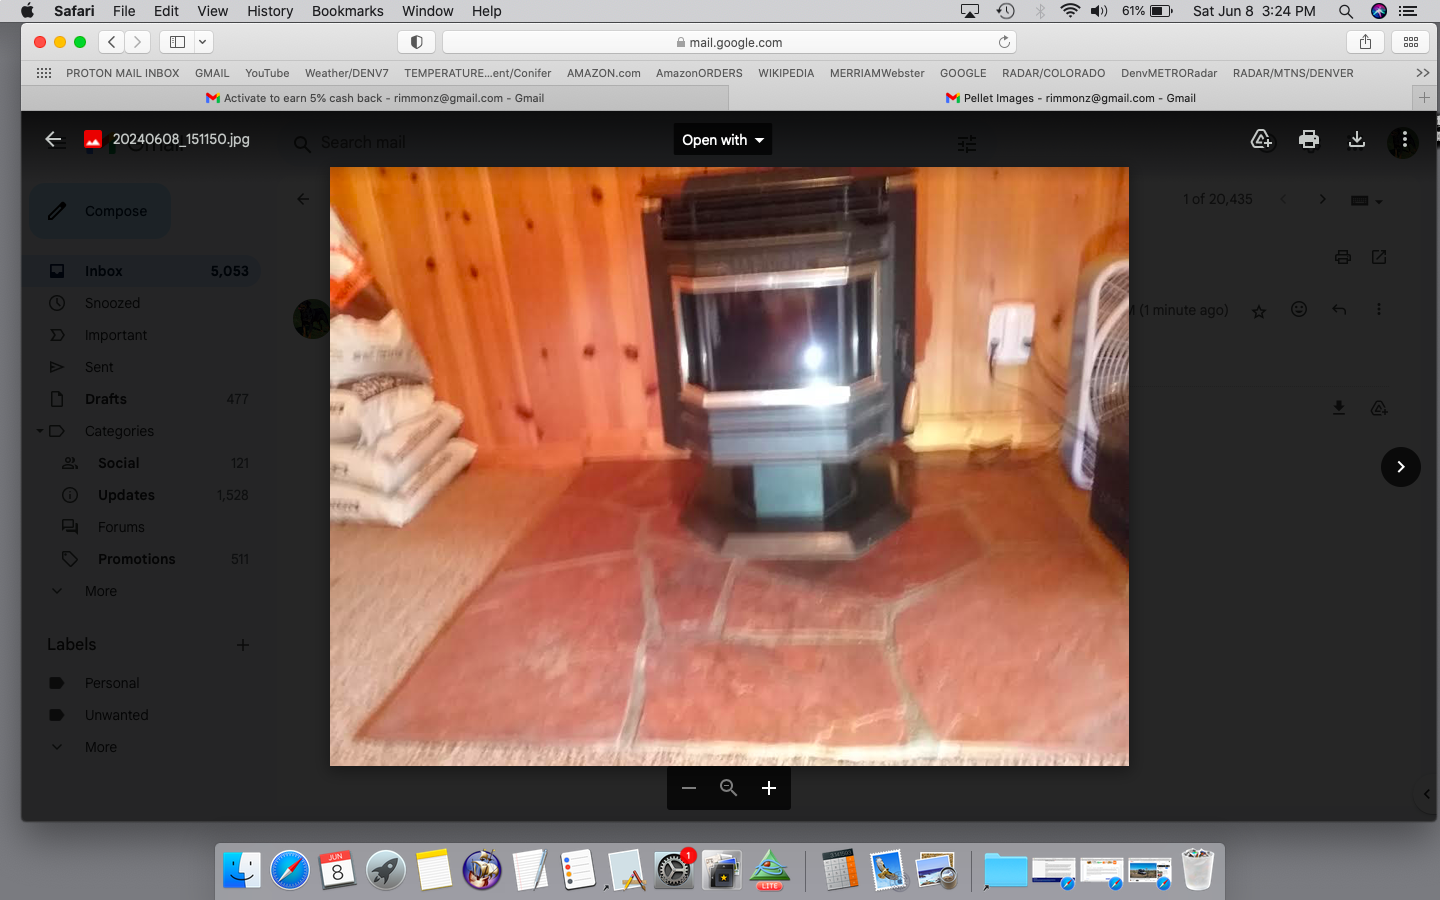 Old Whitfield Pellet Stove/Partially Blocked Exhaust Pipe?